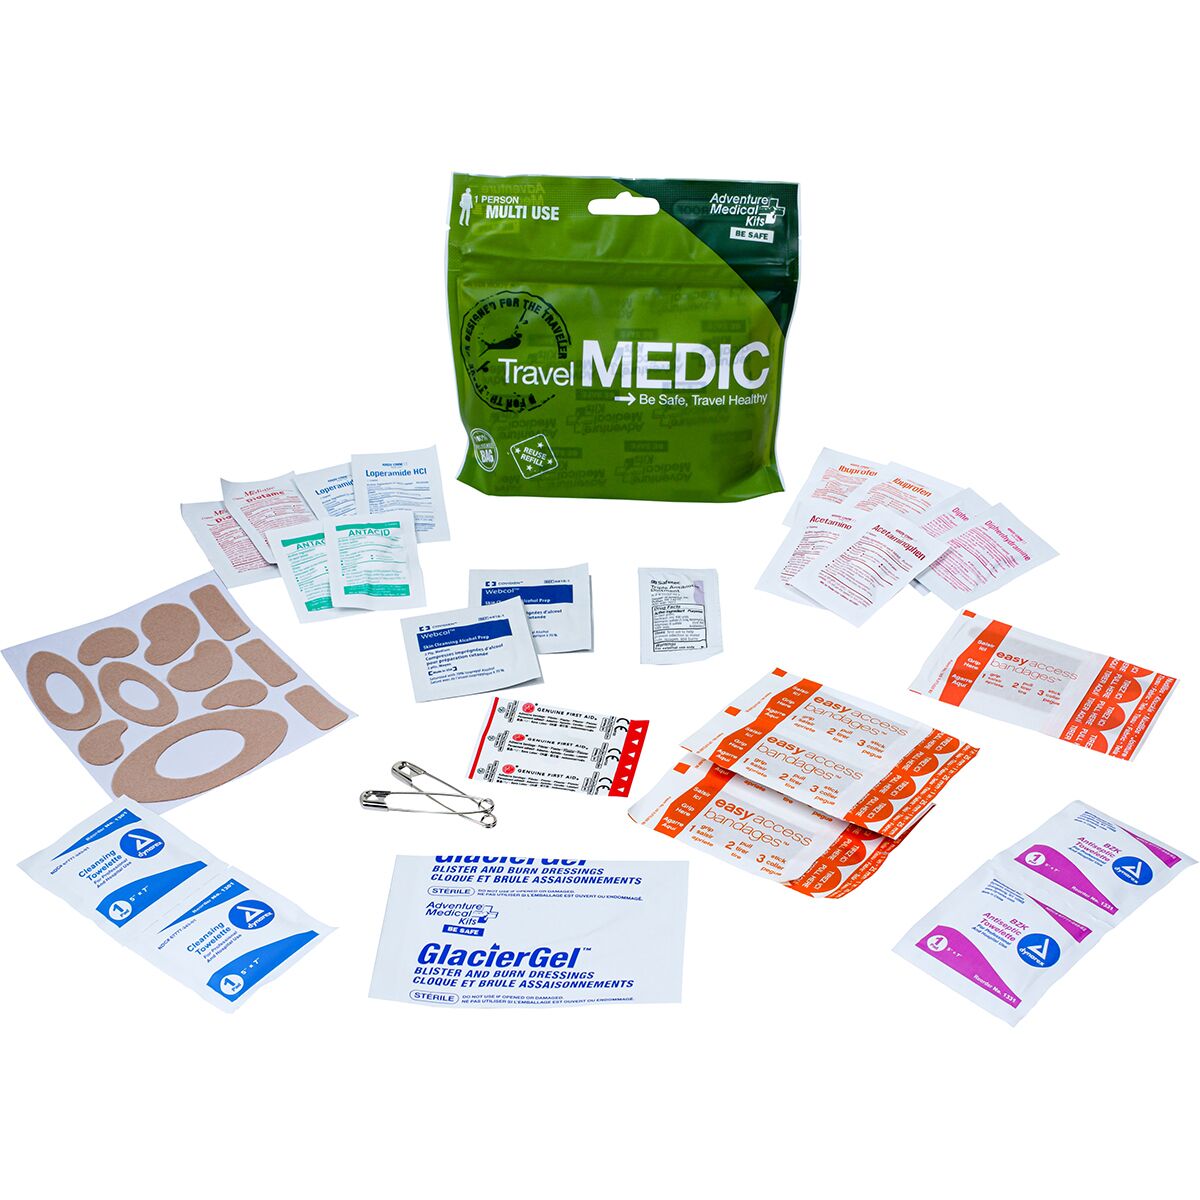 TRIDENT-32 Medical Backpack Kit, First Aid Kits